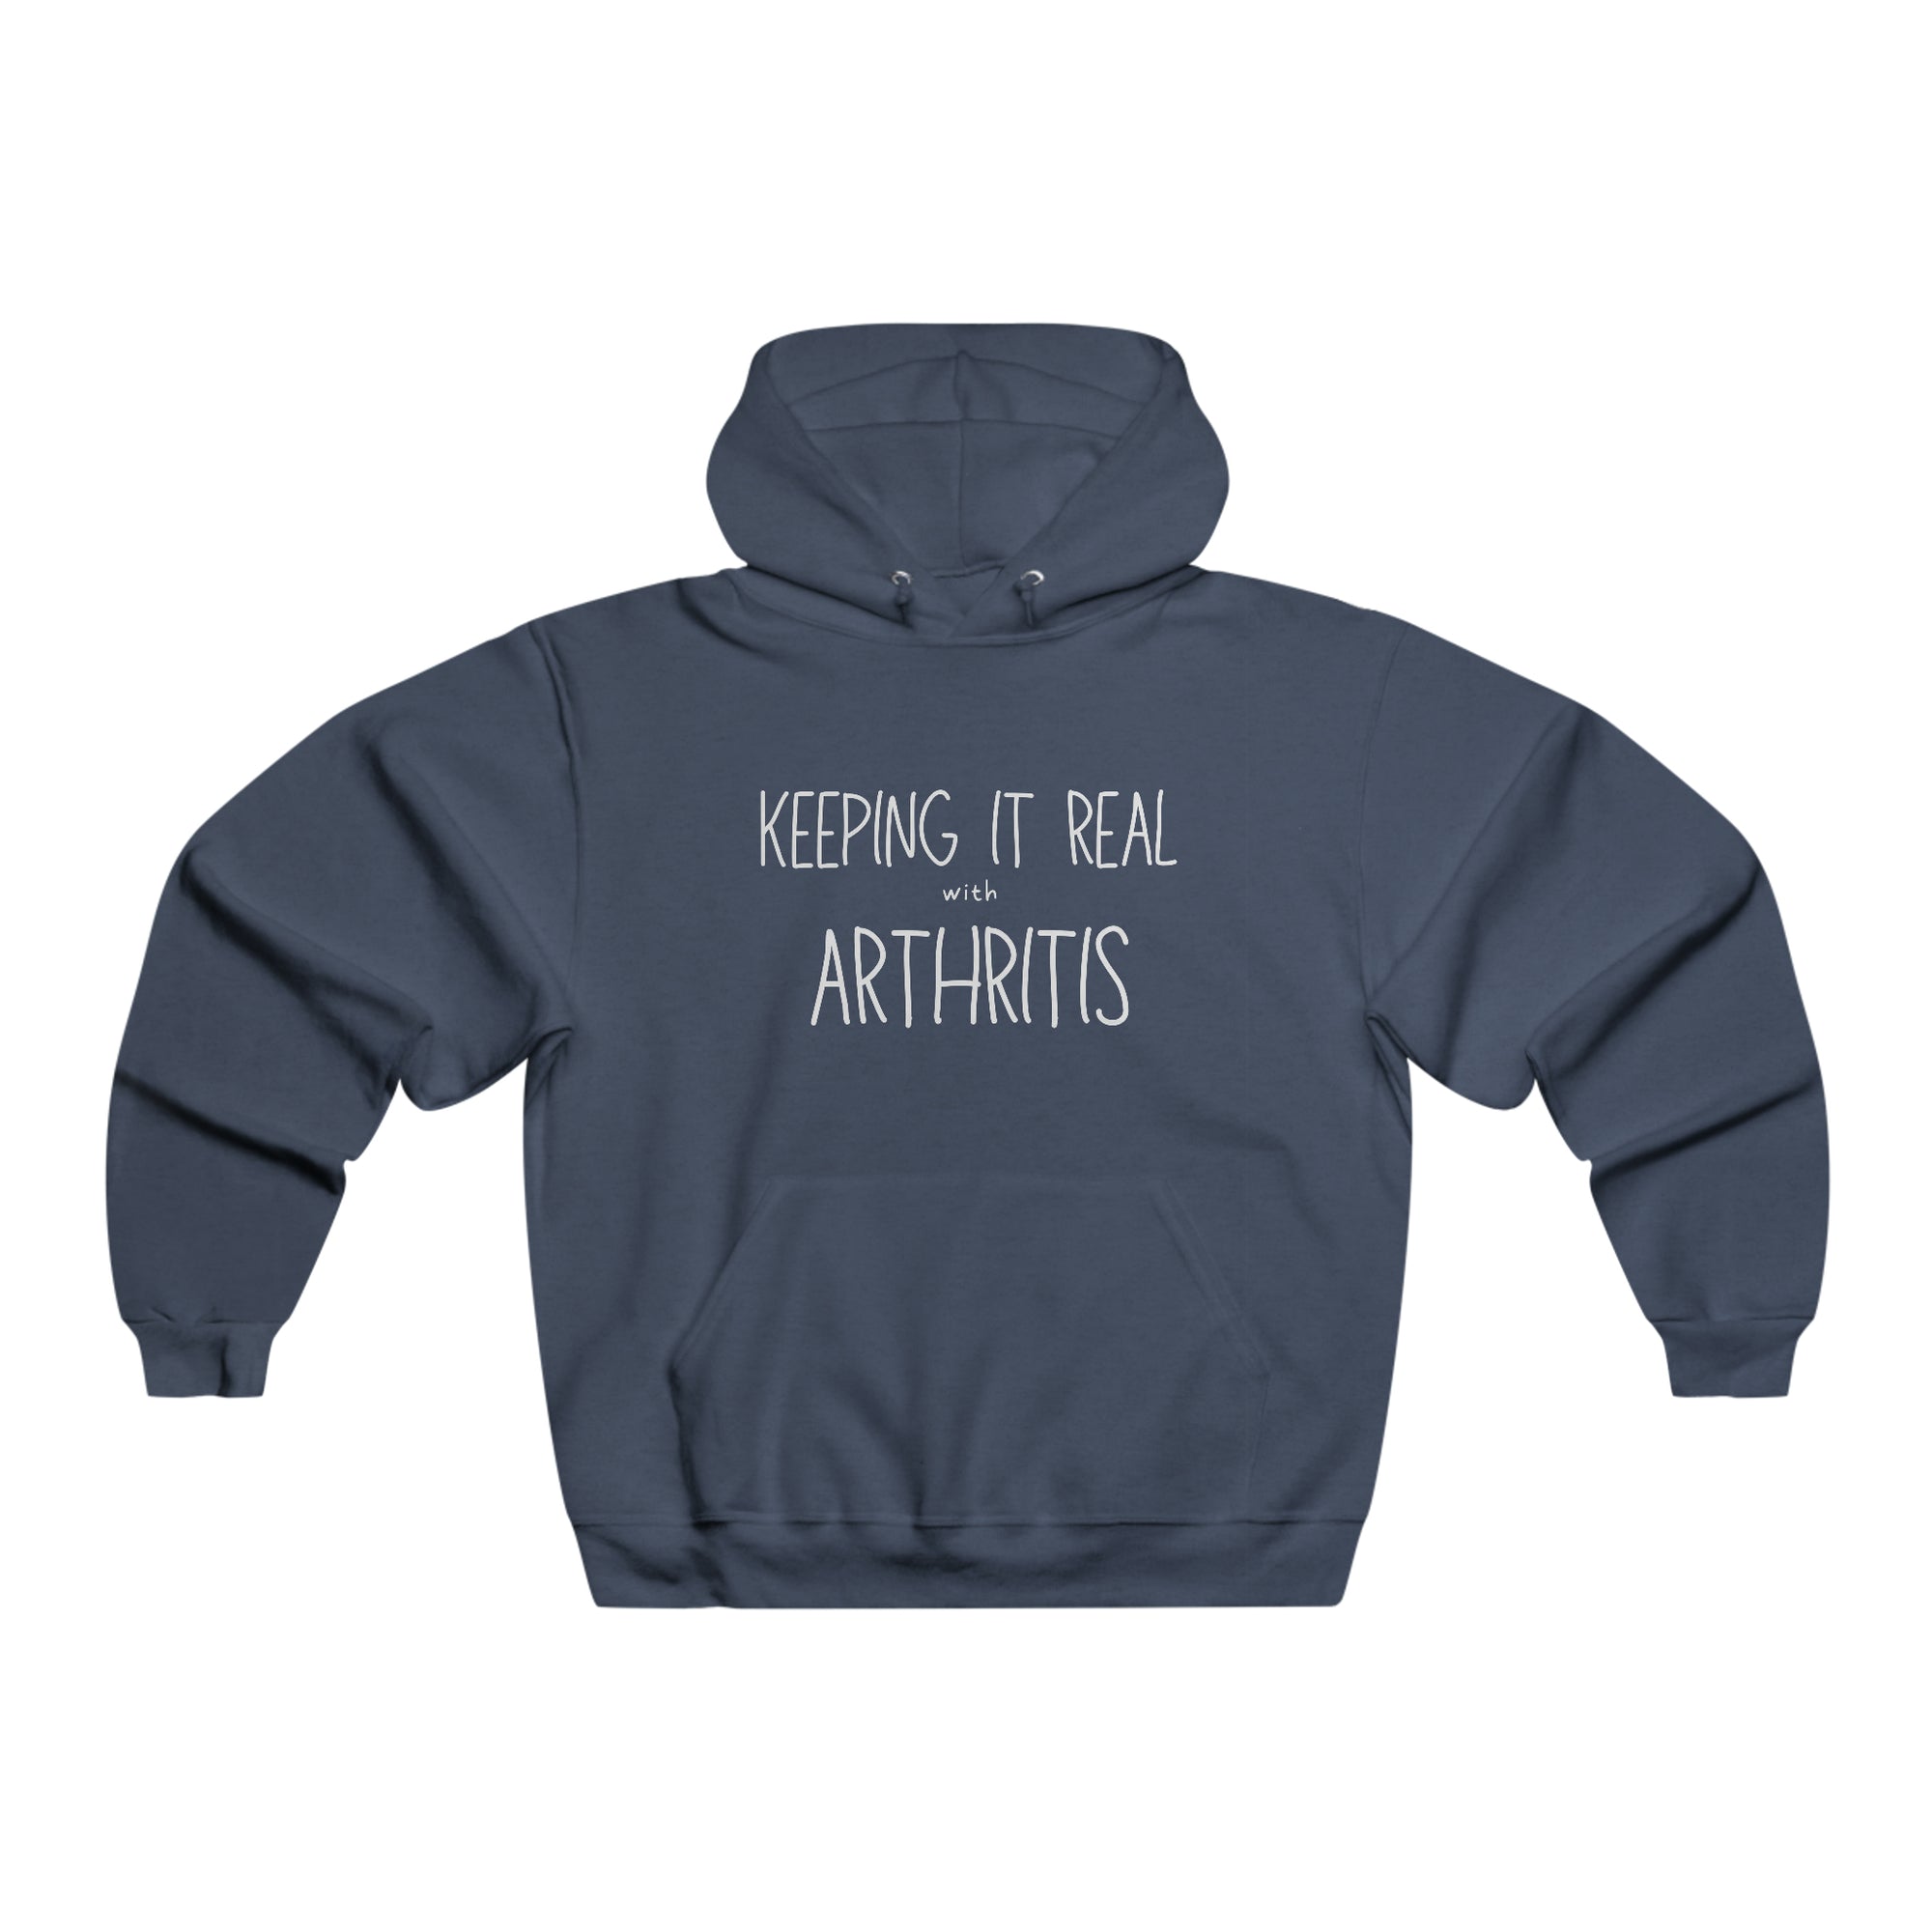 "Keeping it Real with Arthritis" + Arthritis Facts Hoodie